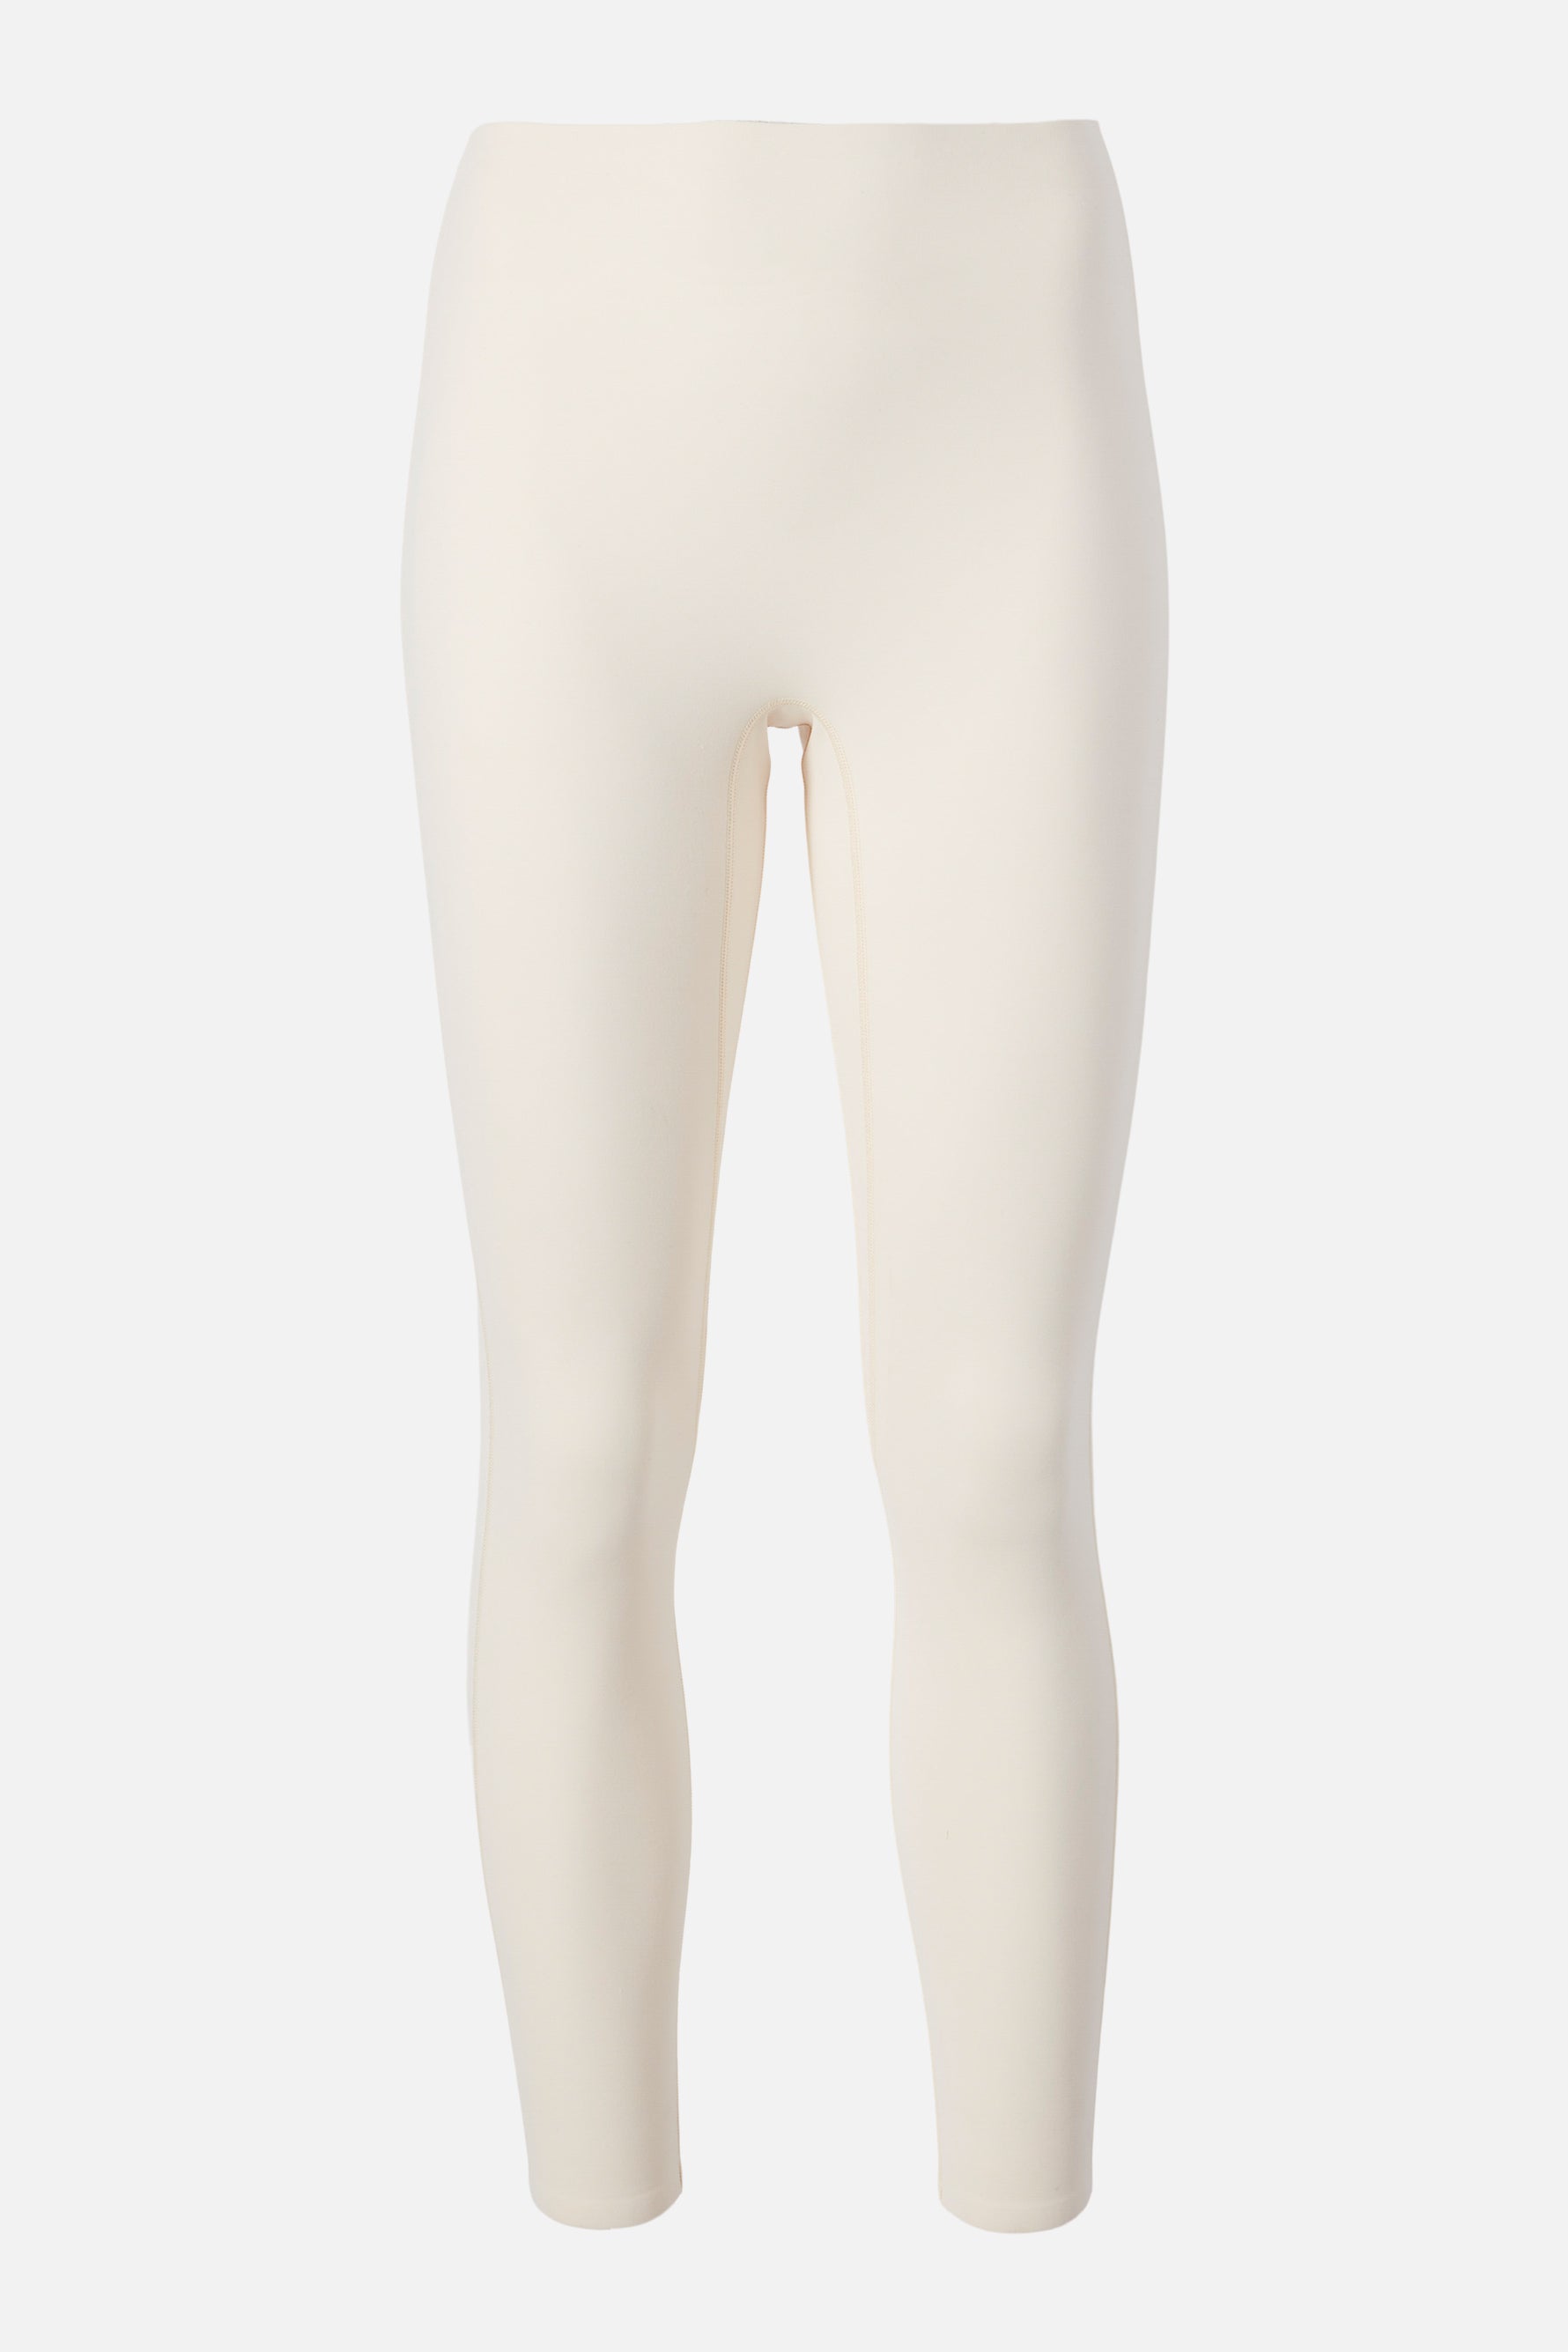 Le Ore Bonded Legging  Urban Outfitters Mexico - Clothing, Music